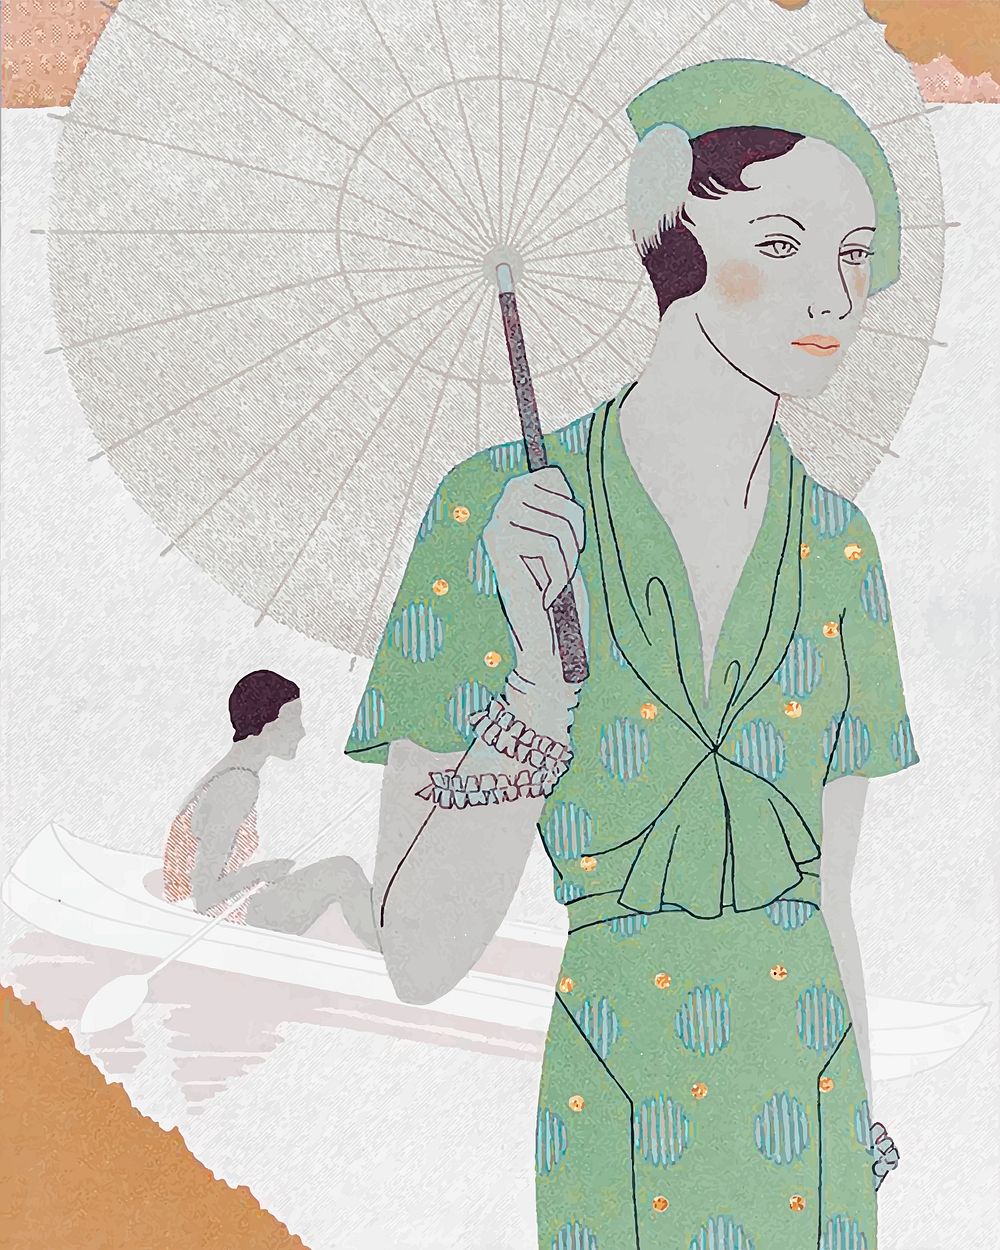 Woman with umbrella vintage illustration, remix from original artwork by M. Renaud.